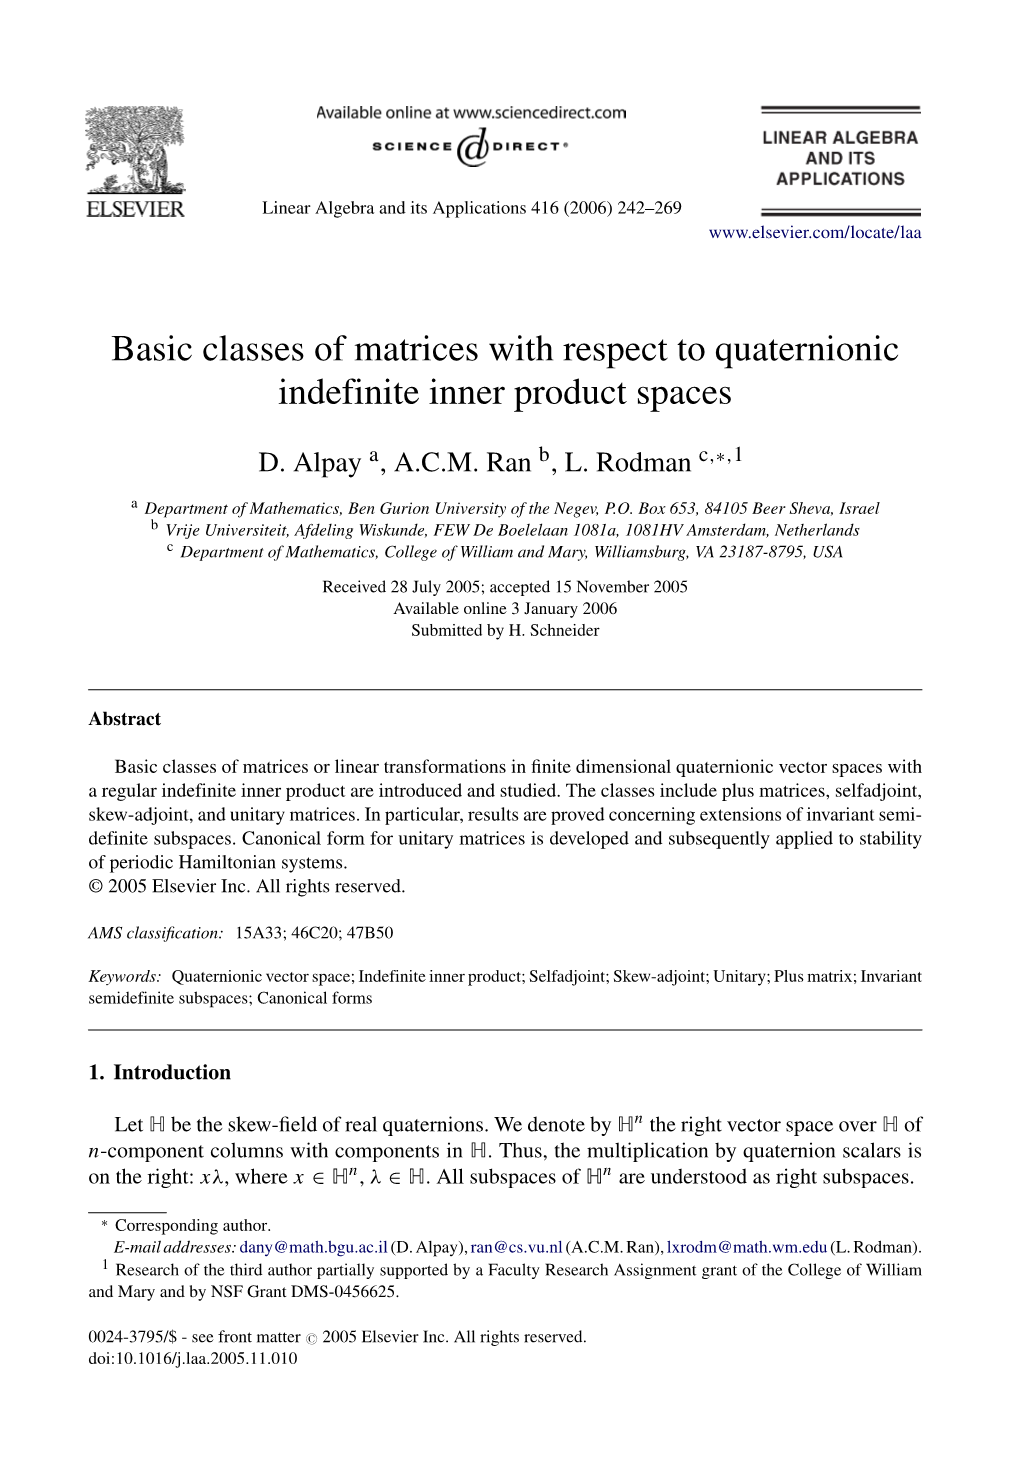 Basic Classes of Matrices with Respect to Quaternionic Indefinite Inner Product Spaces